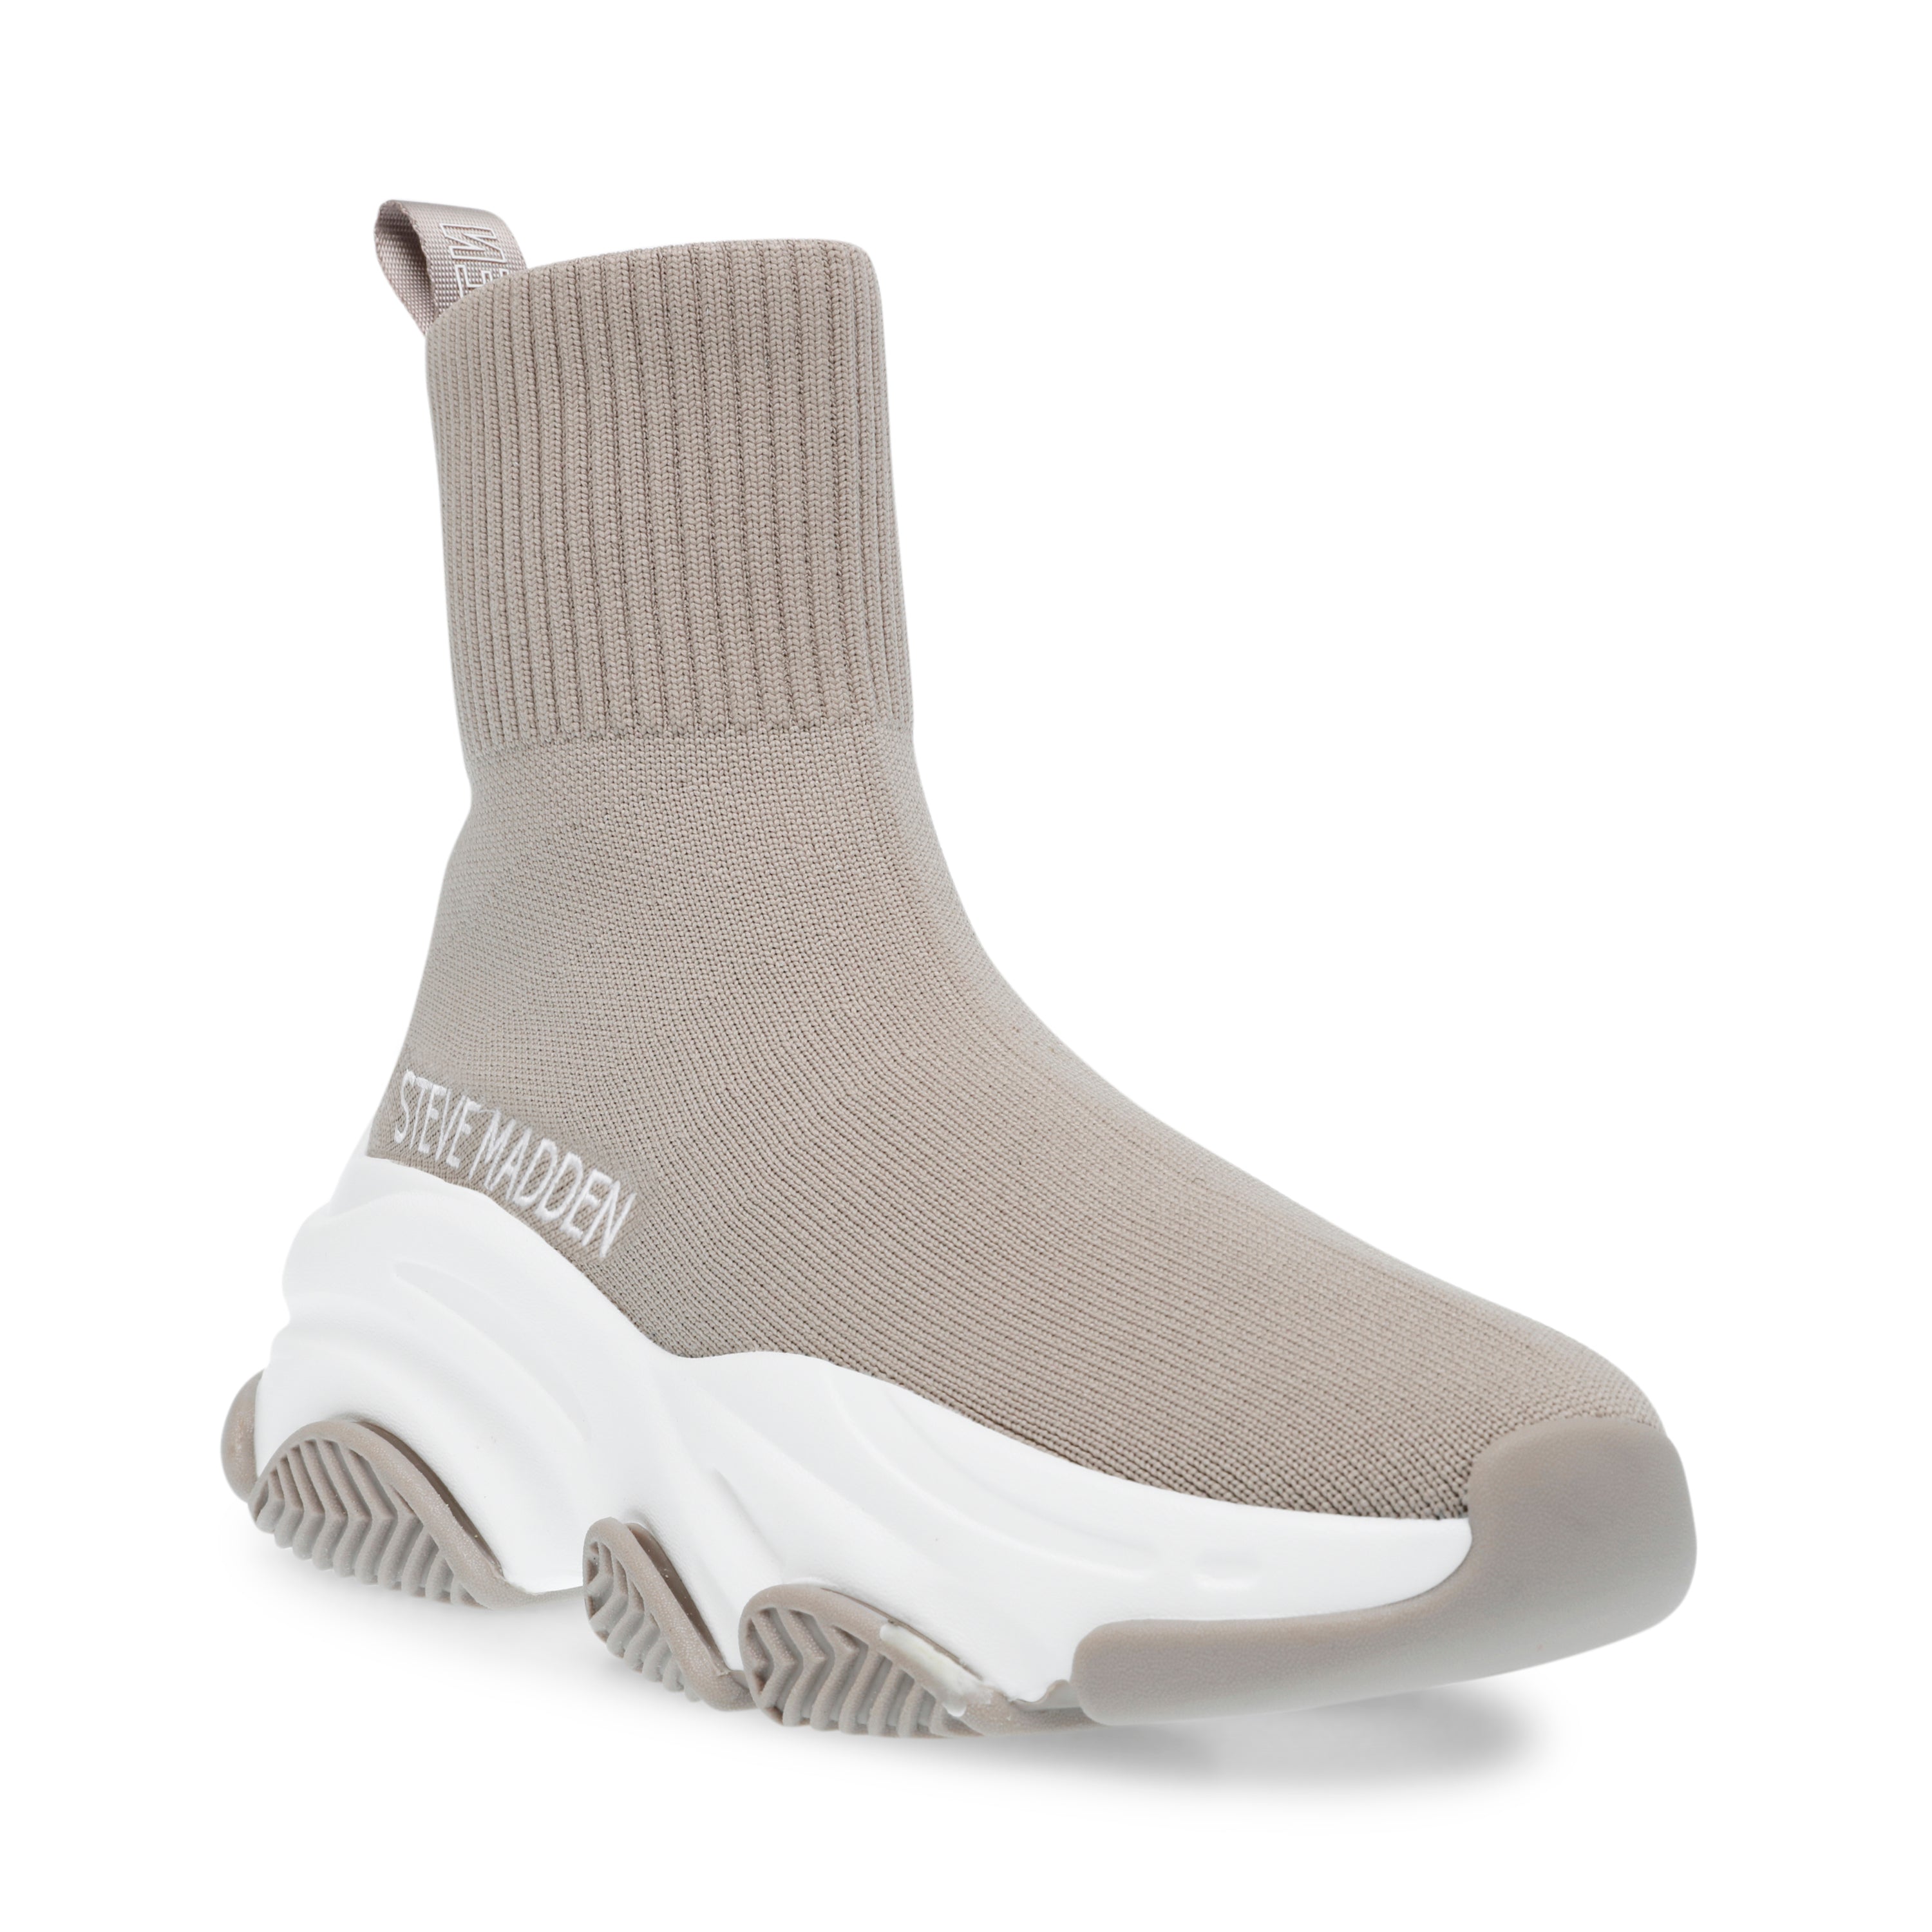 Prodigy Sneaker Lt Taupe/White- Hover Image